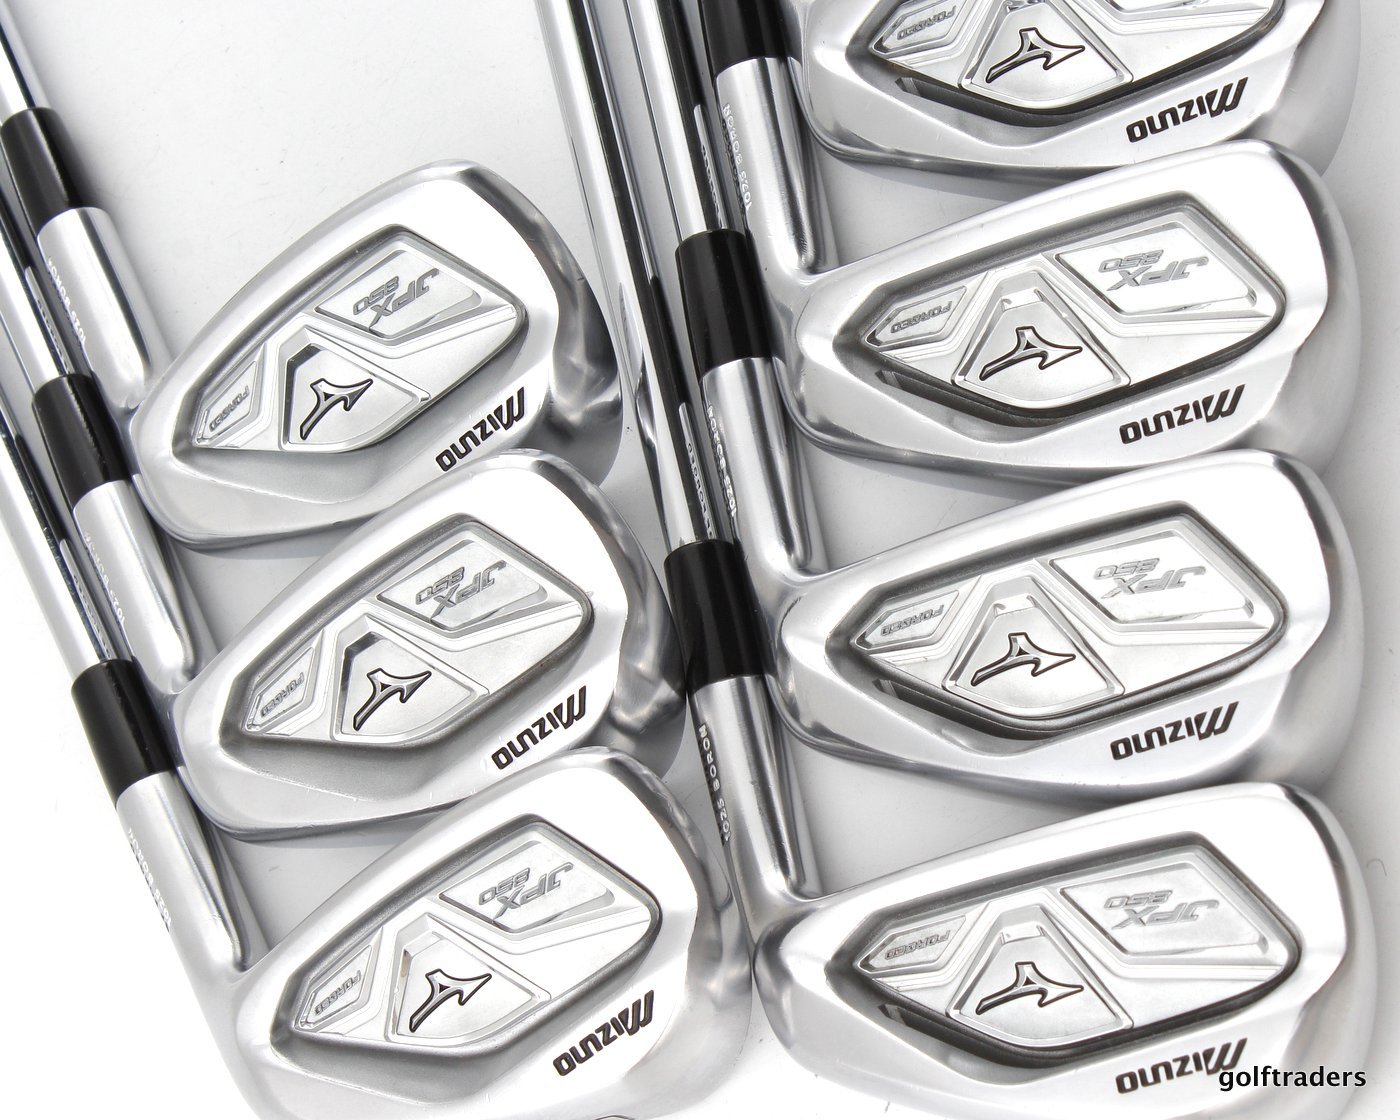 Mizuno Jpx 850 Forged Release Date | lupon.gov.ph